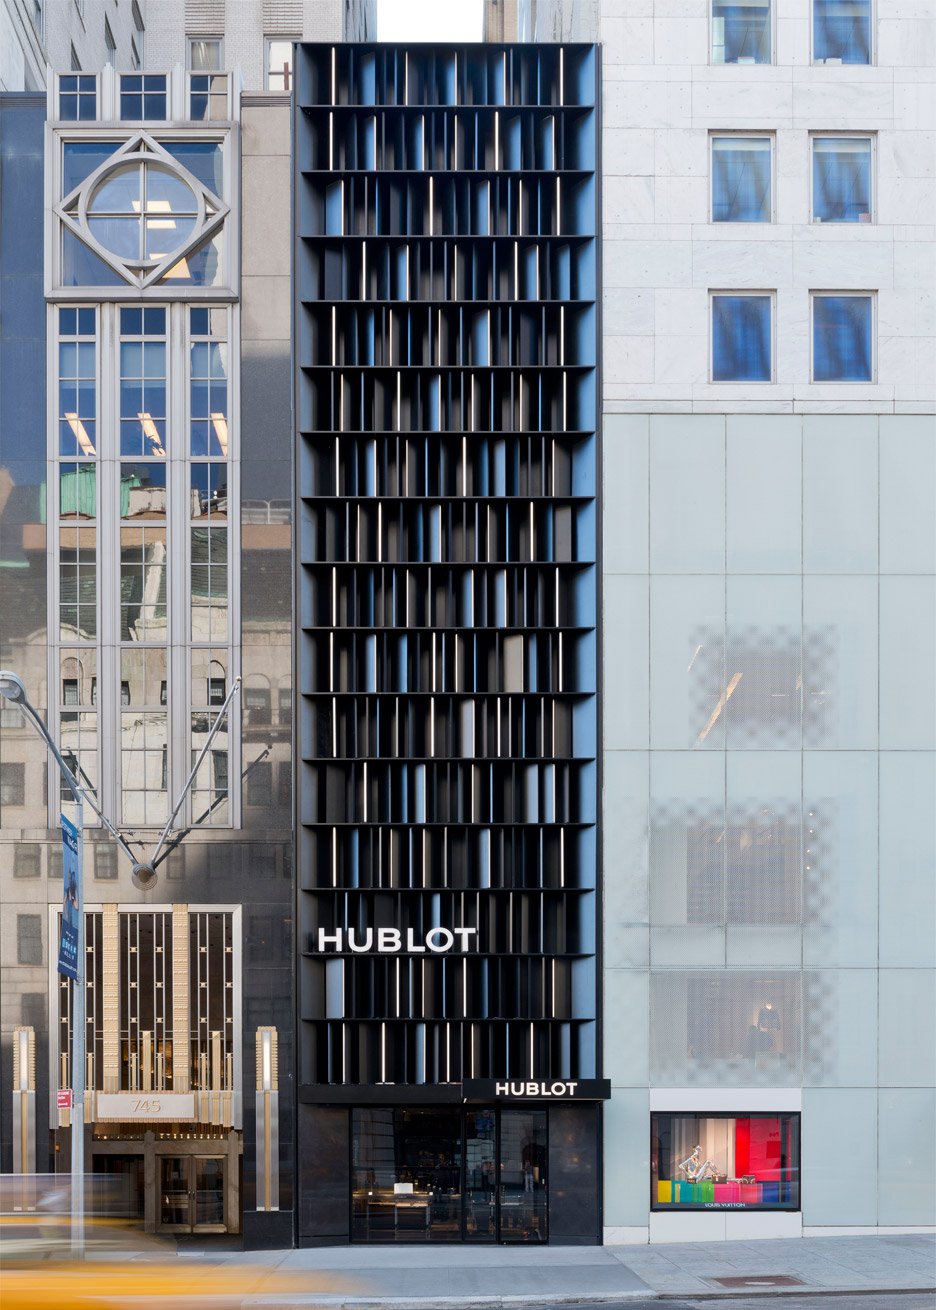 Hublot Fifth Avenue in New York City, retail architecture and interiors by Peter Marino. Photograph by Adrian Wilson